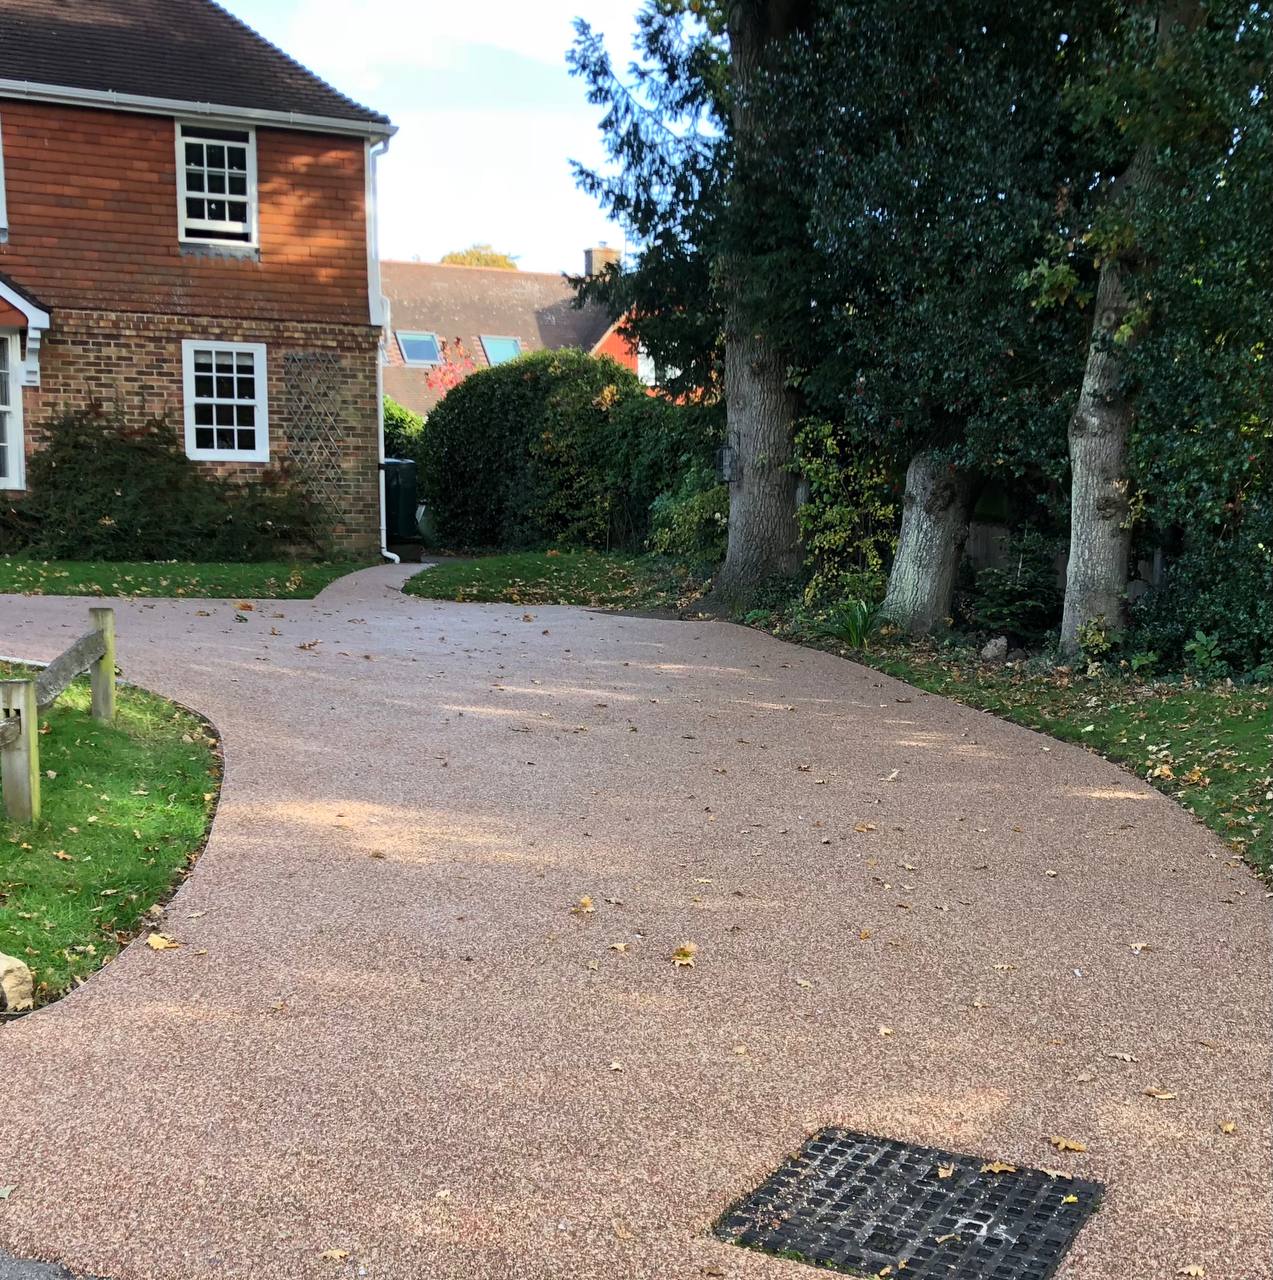 This is a photo of a Resin bound driveway carried out in a district of Swansea. All works done by Resin Driveways Swansea